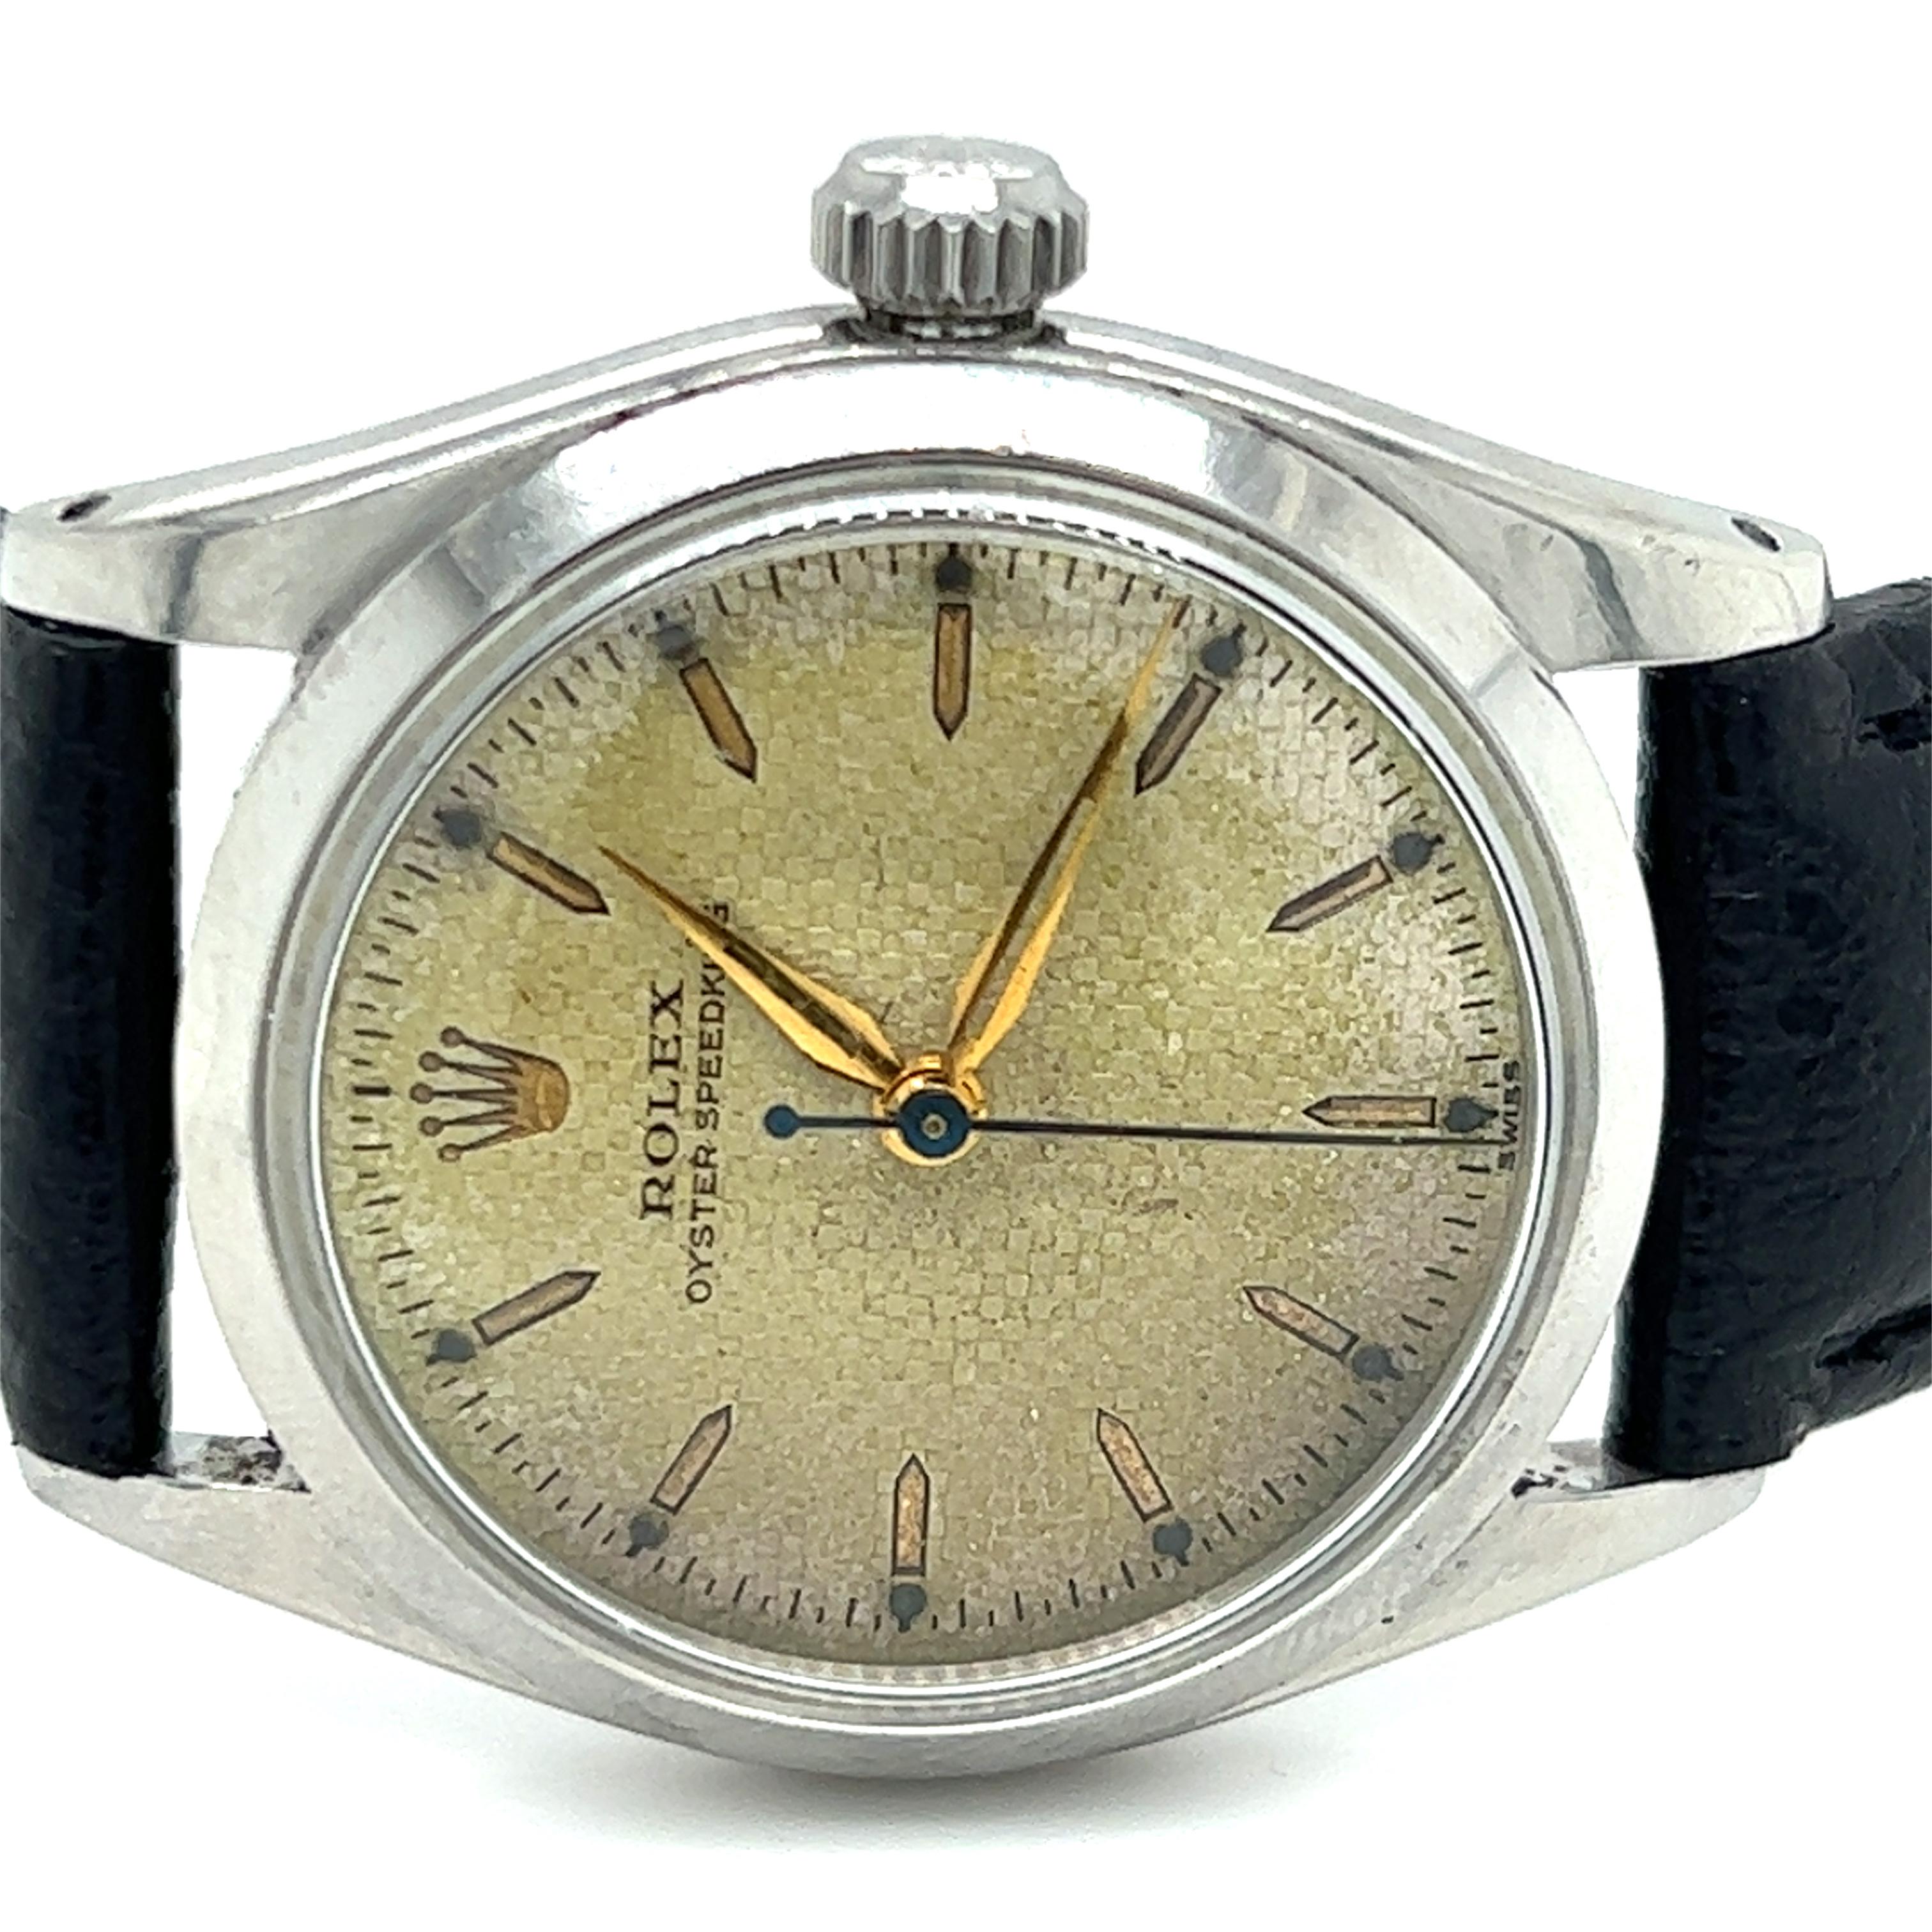 One stainless steel Rolex Oyster Speedking model #6420 Serial # 54633 Circa 1954.